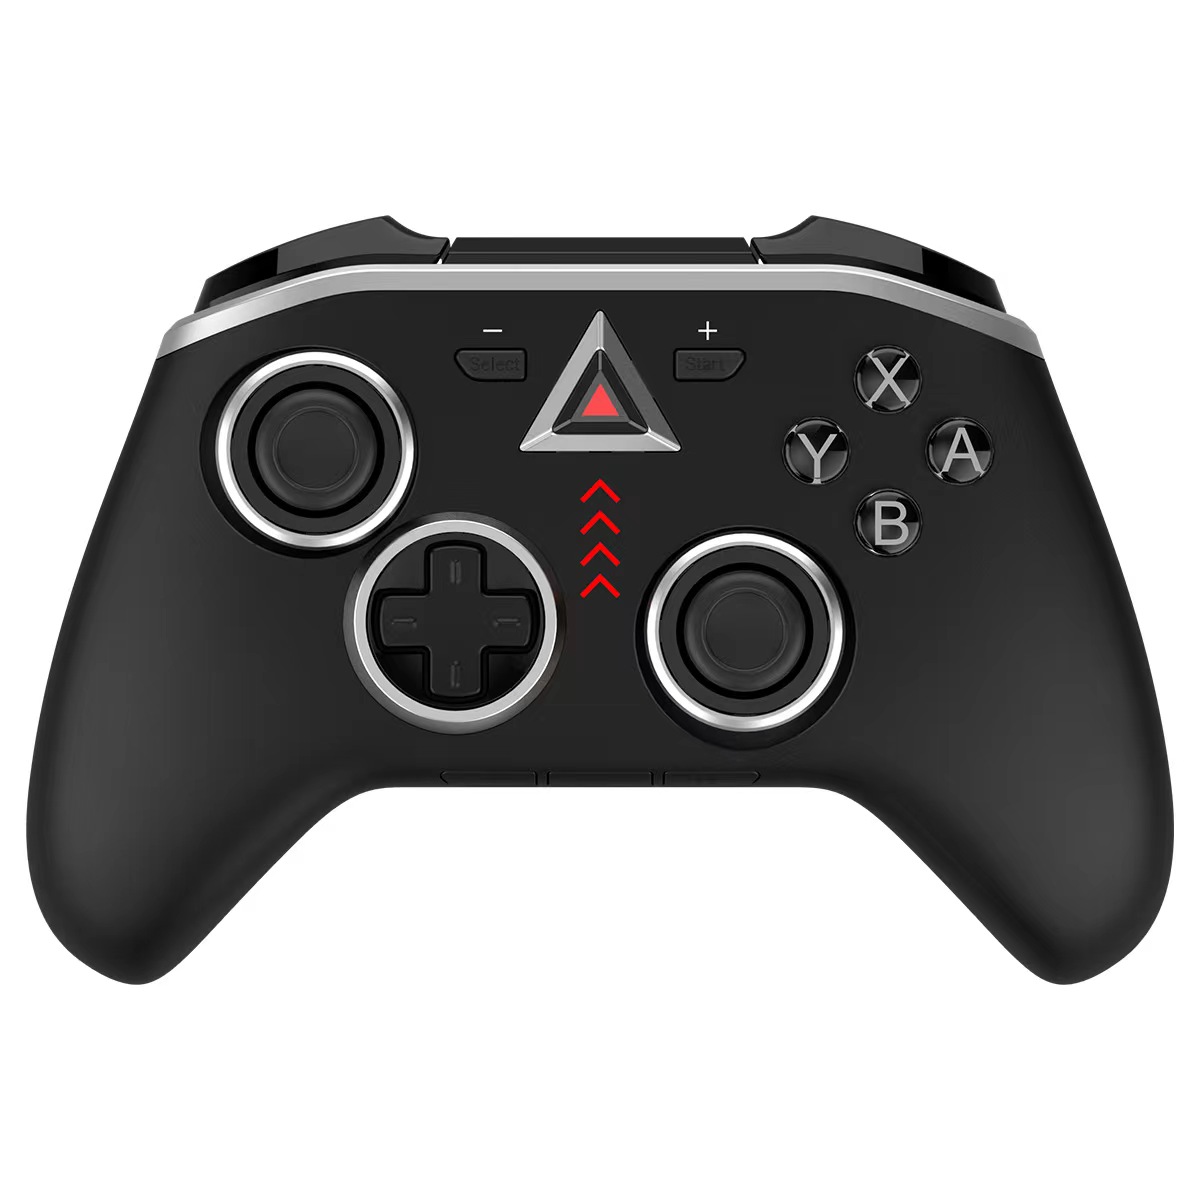 PG-sw097 switch game controller